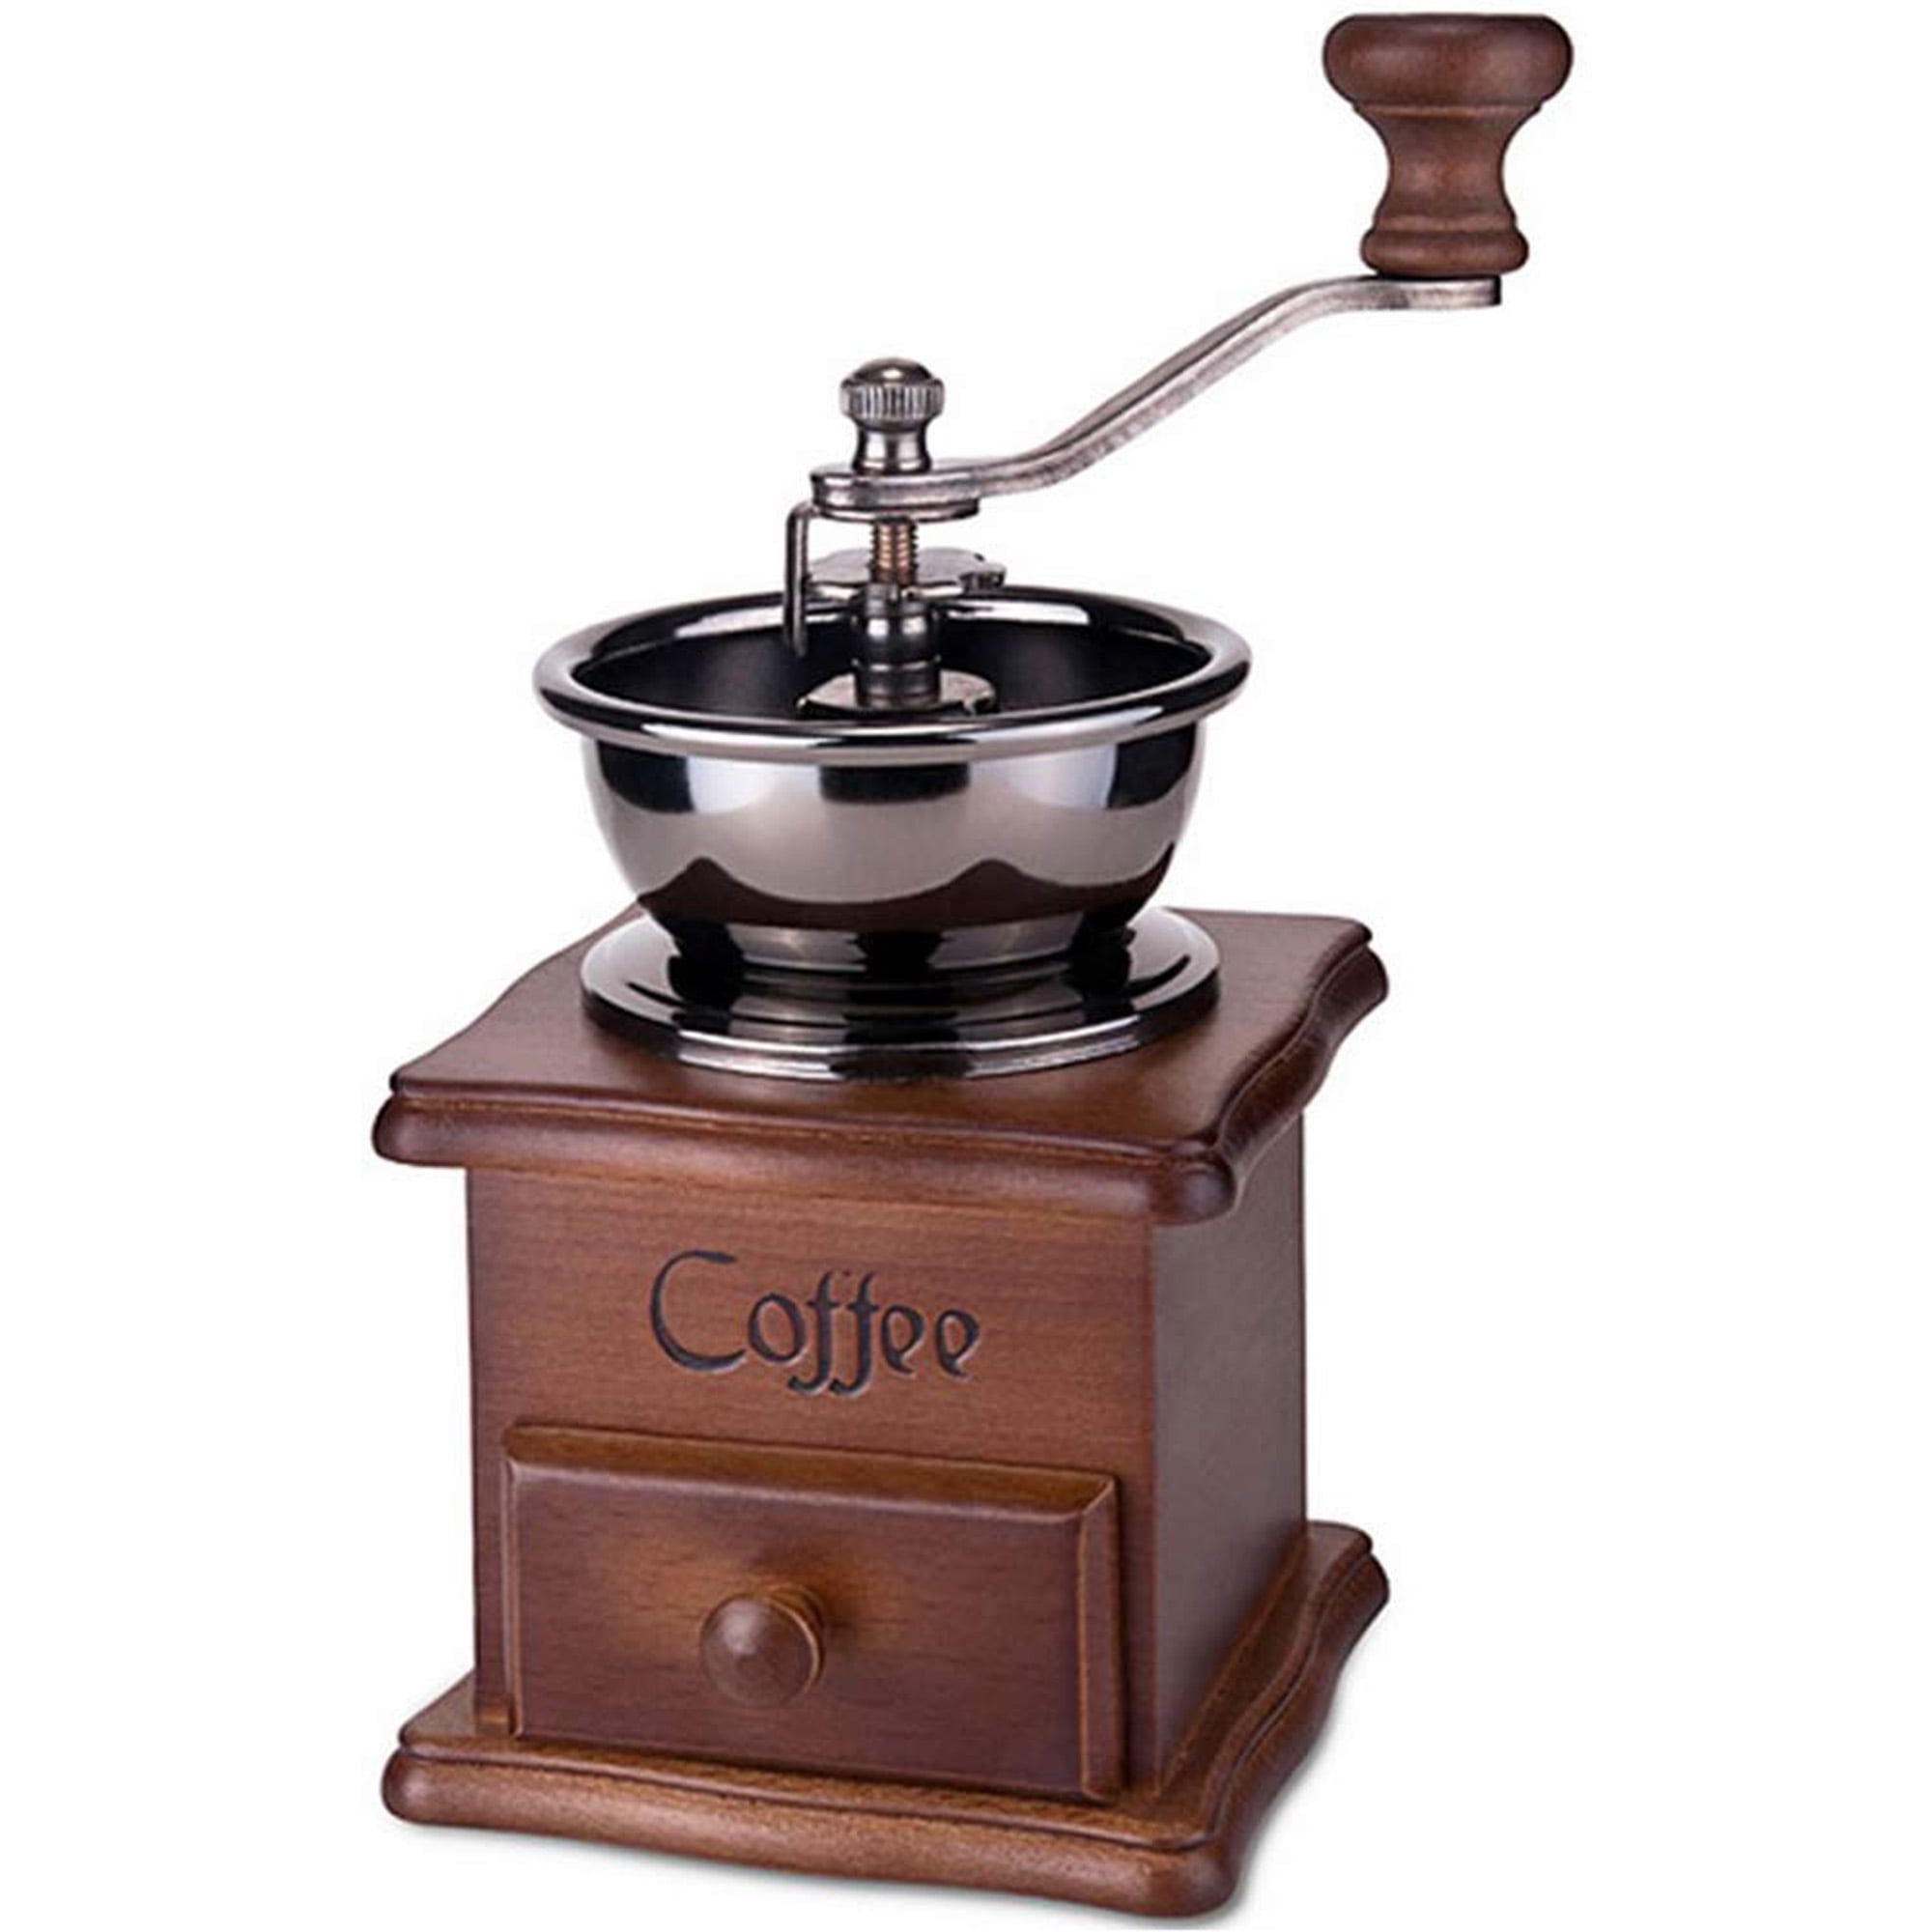 Vintage Manual Coffee Grinder Wooden Hand Coffee Mill With Ceramic Hand Crank 